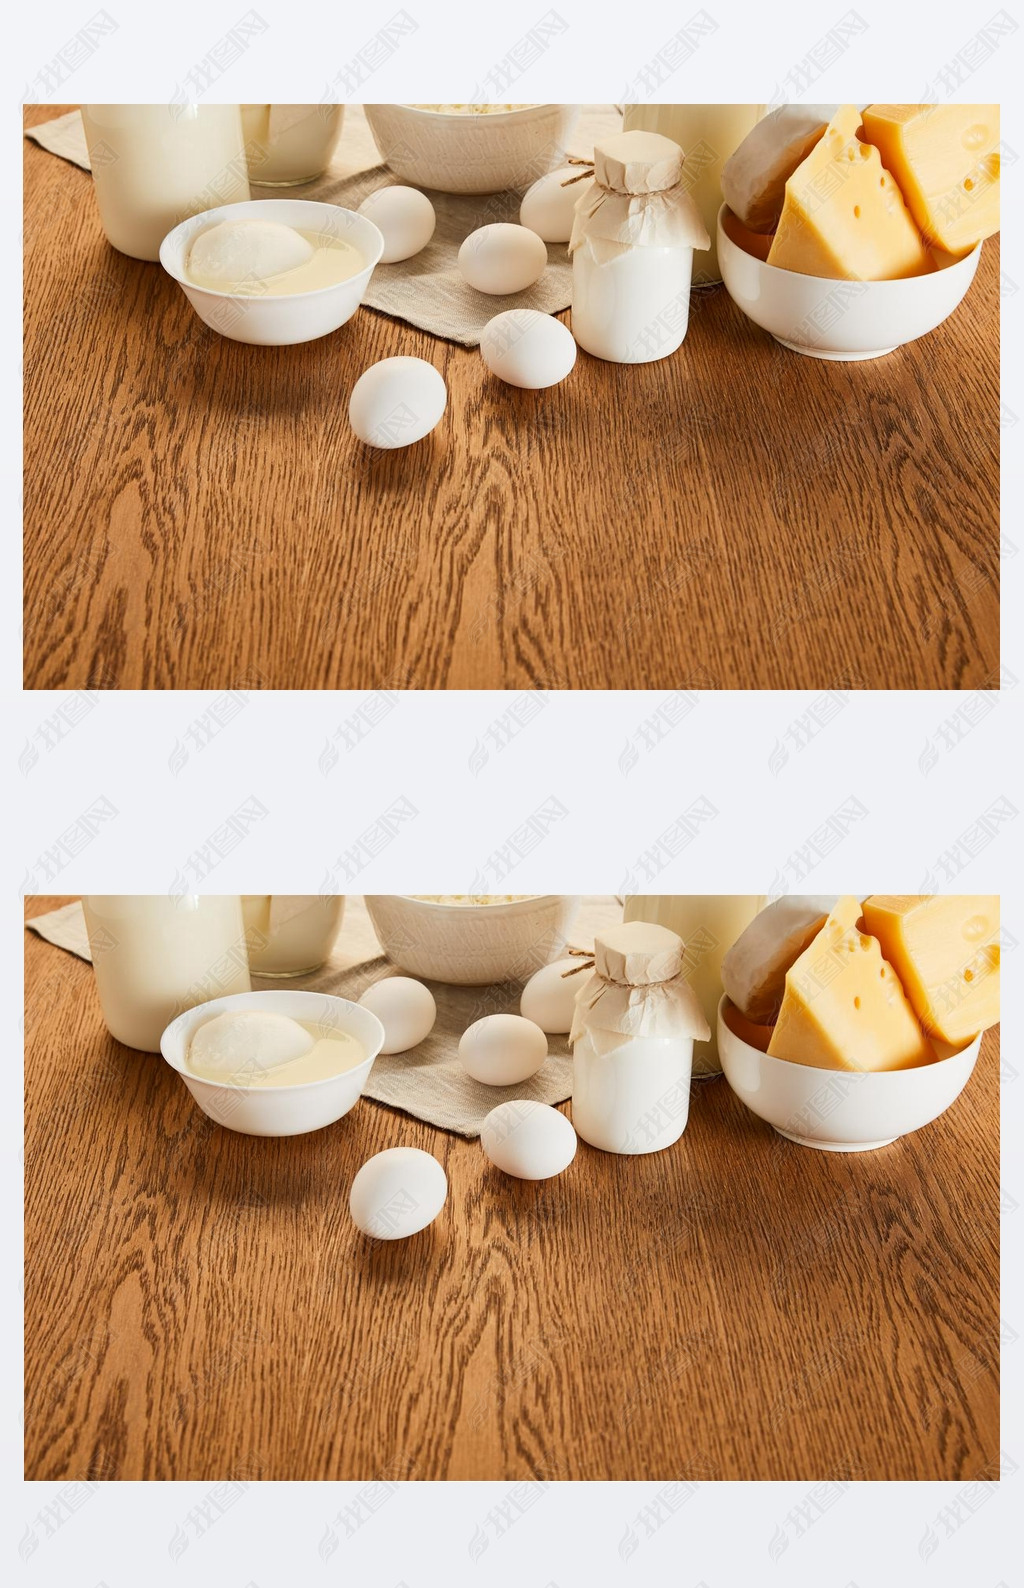 various fresh organic dairy products and eggs on rustic wooden table